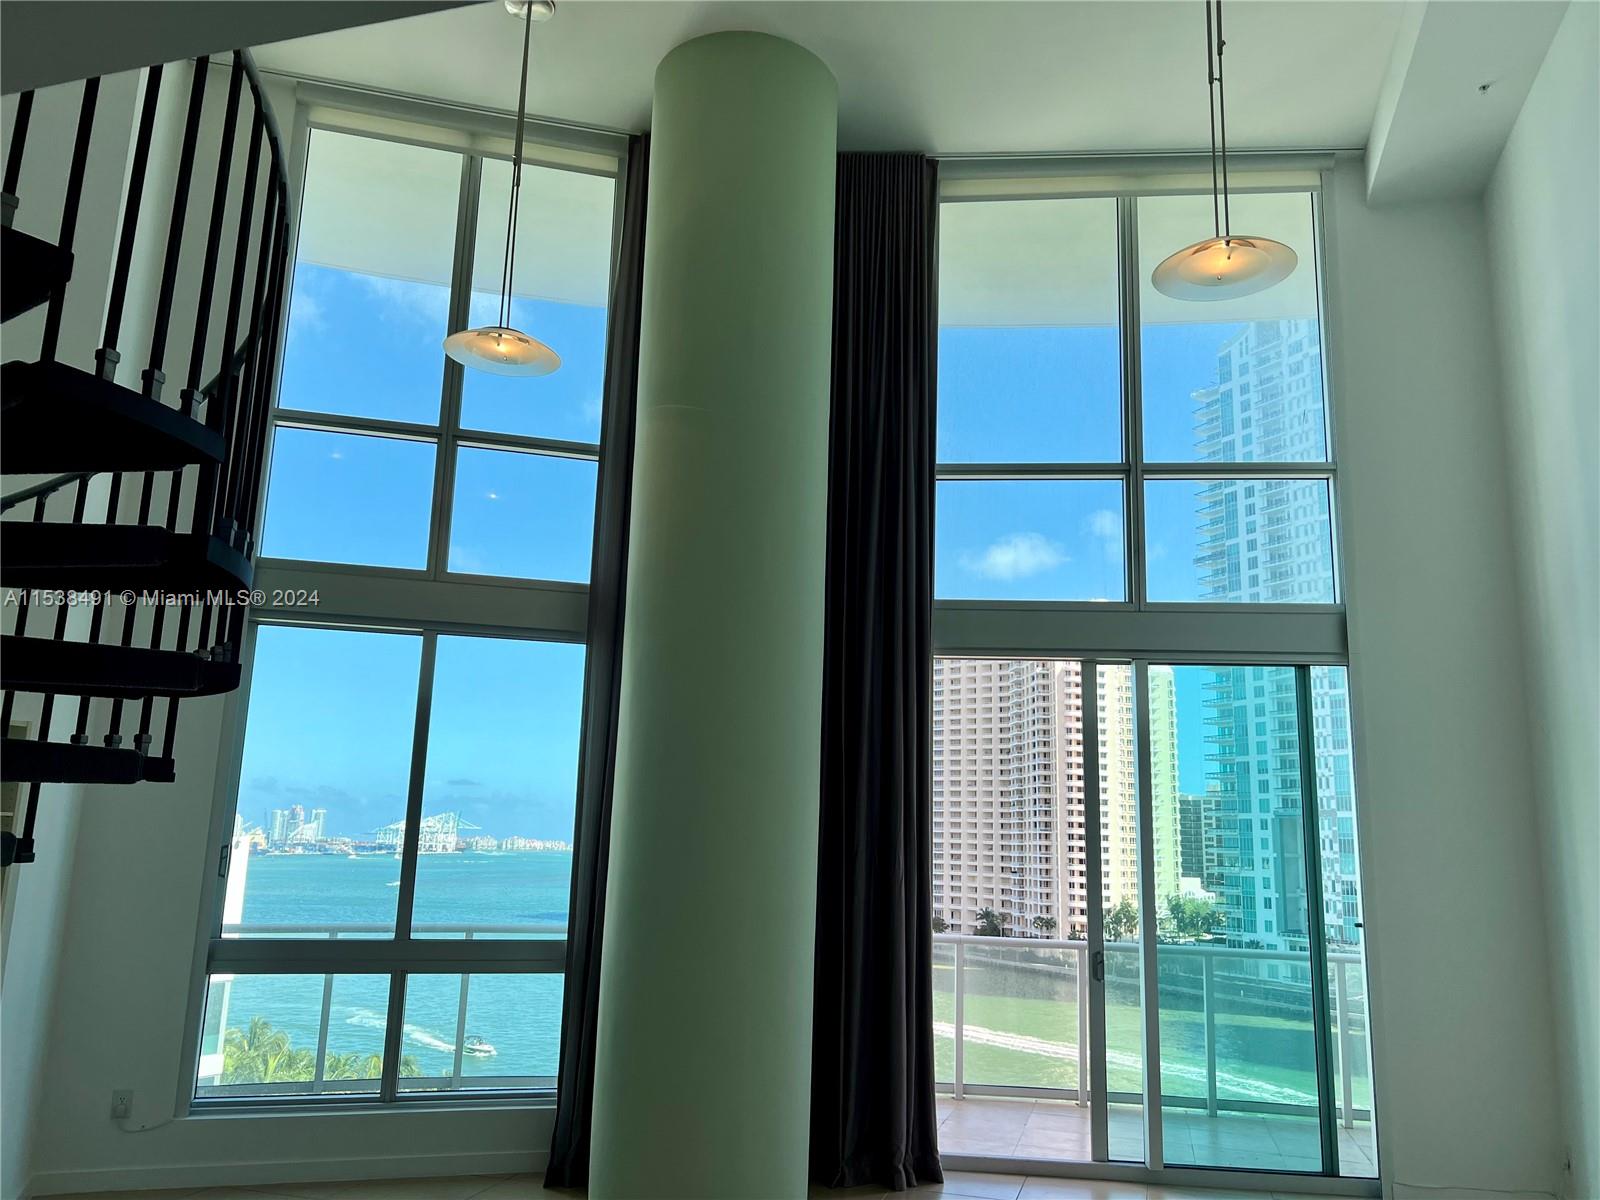 Dramatic & impressive views of Bay and River! Two story LOFT w/amazing 19" high ceilings to catch 180 degrees of awe inspiring sunrises & water views! Best line in the building! Many upgrades: built ins, closets, lighting fixtures, window treatments, etc. Walking distance to Whole Foods, Bayside, Brickell, Metro mover, Novikov Restaurant and Joe & The Juice downstairs plus 17-screen Silverspot Cinema and Brickell City Center. Park your car in the same level of the unit. Building offers luxurious life style, 24-hr front desk attended. Chic downtown living at its best! Pool is currently closed until further notice.